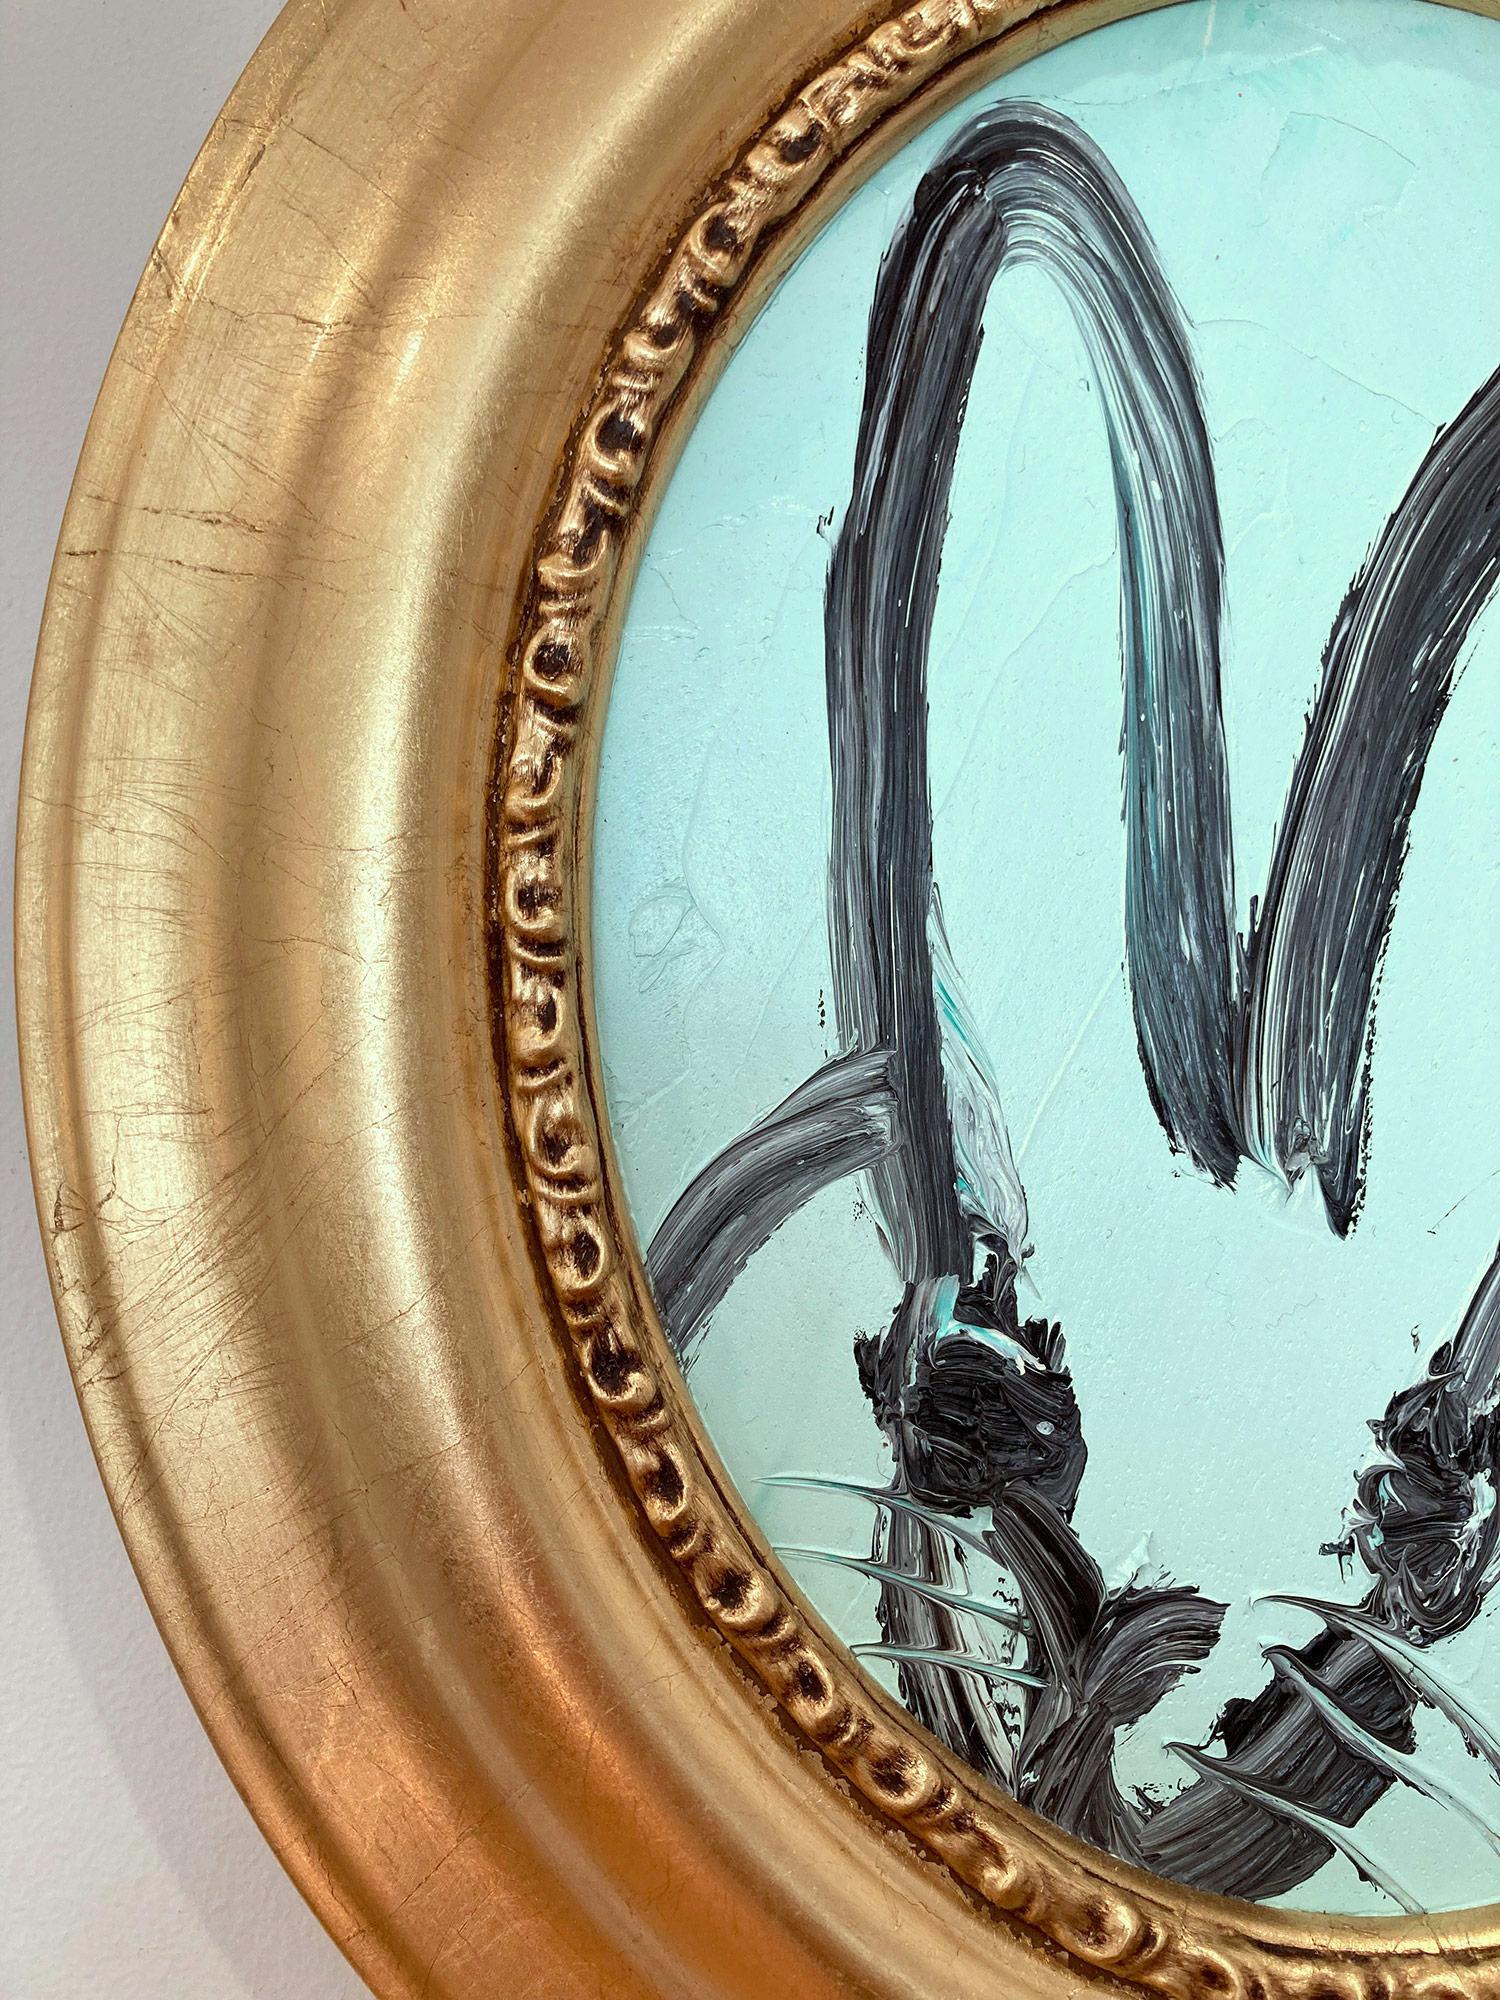 A wonderful composition of one of Slonem's most iconic subjects, Bunnies. This piece depicts a gestural figure of a black bunny on Powder Blue background with thick use of paint. It is housed in a wonderful antique style gold tone frame. Inspired by